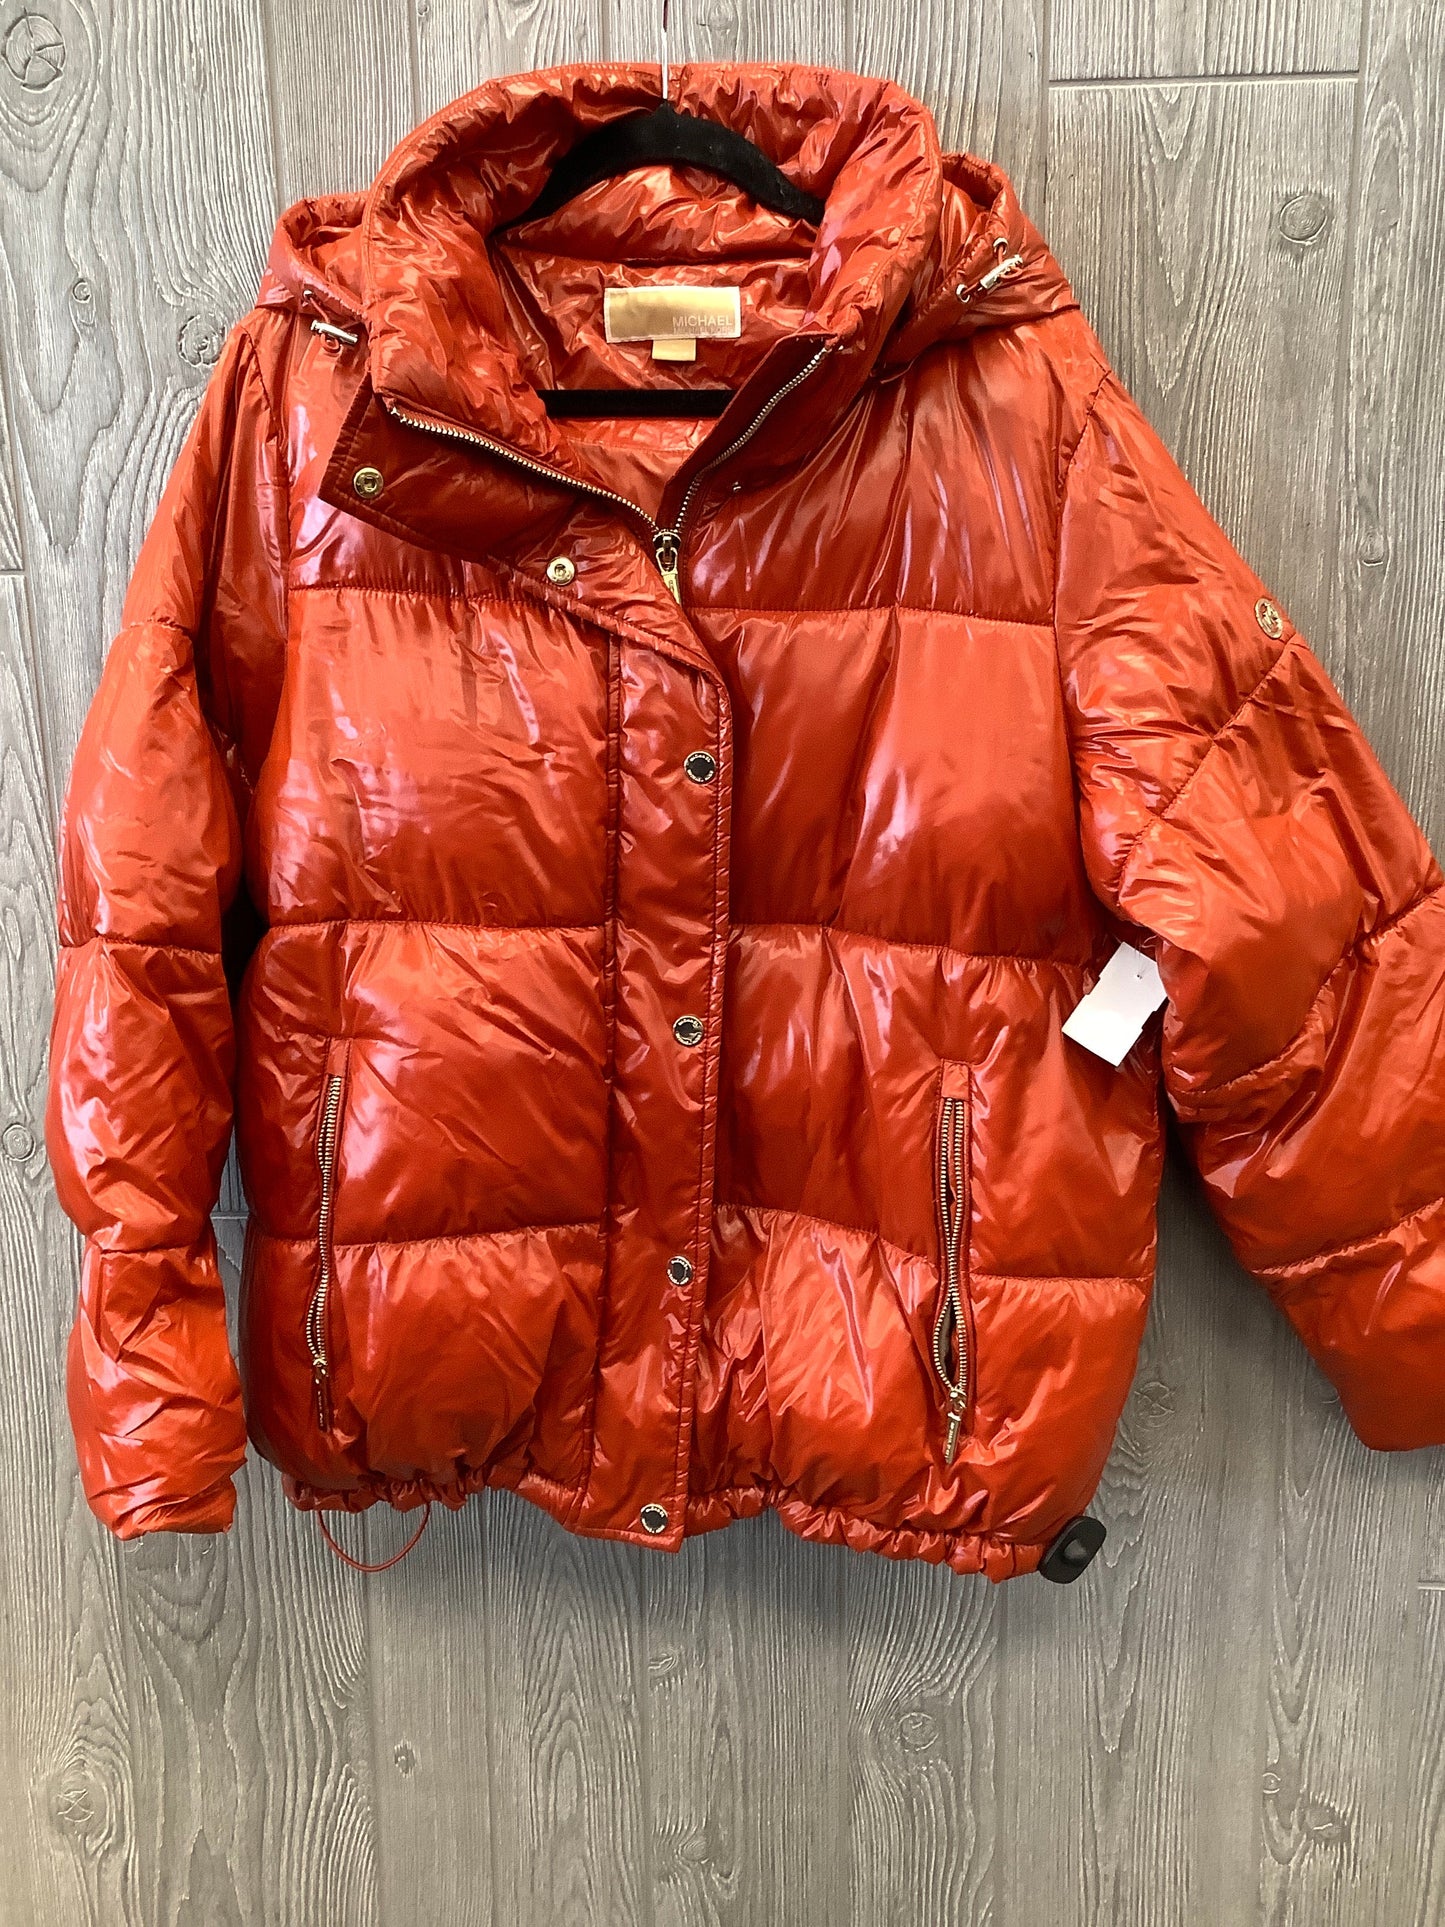 Orange Coat Puffer & Quilted Michael By Michael Kors, Size Xl